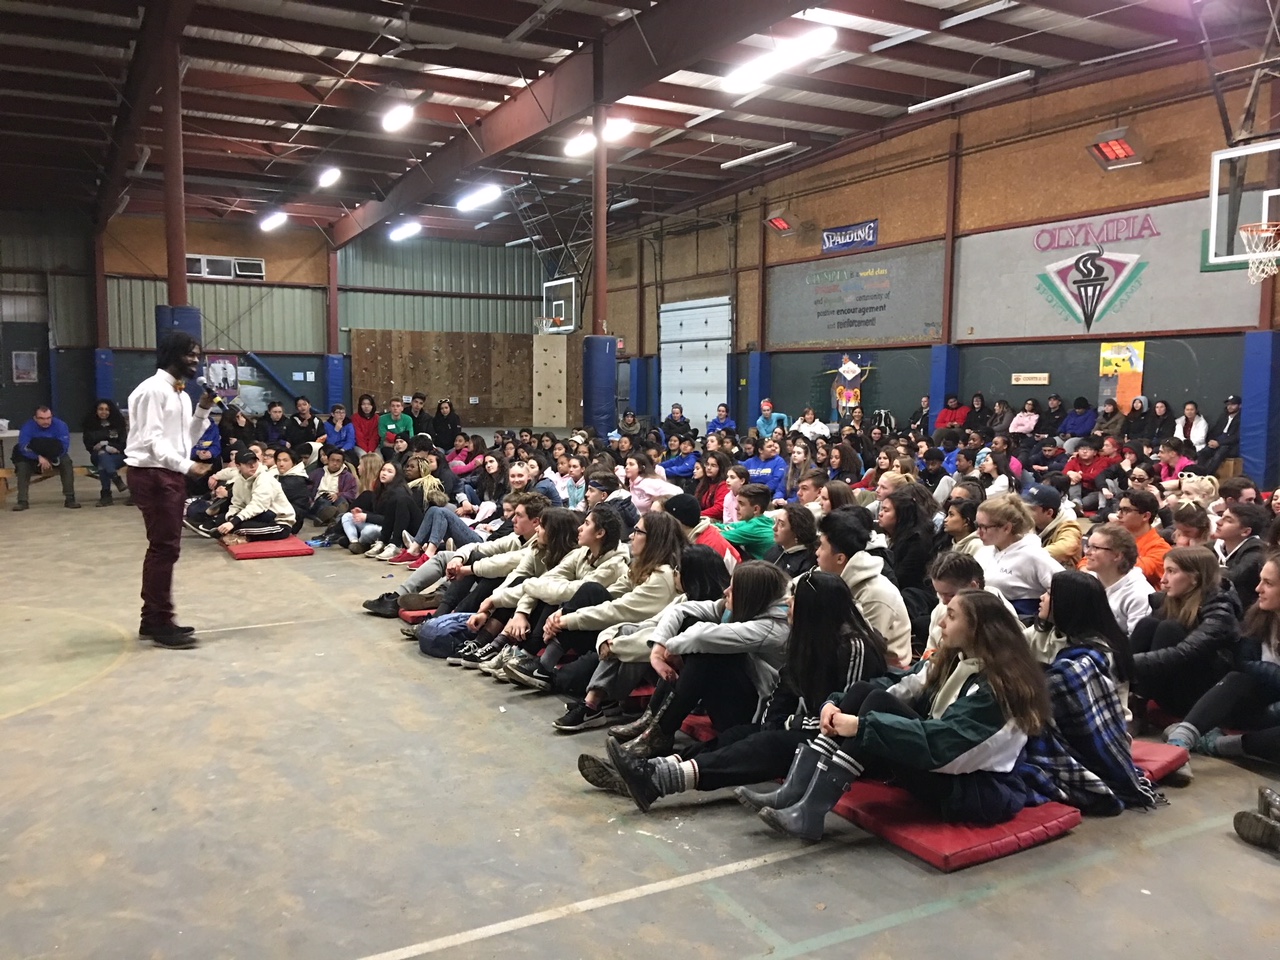 Students attending presentation at Camp Olympia